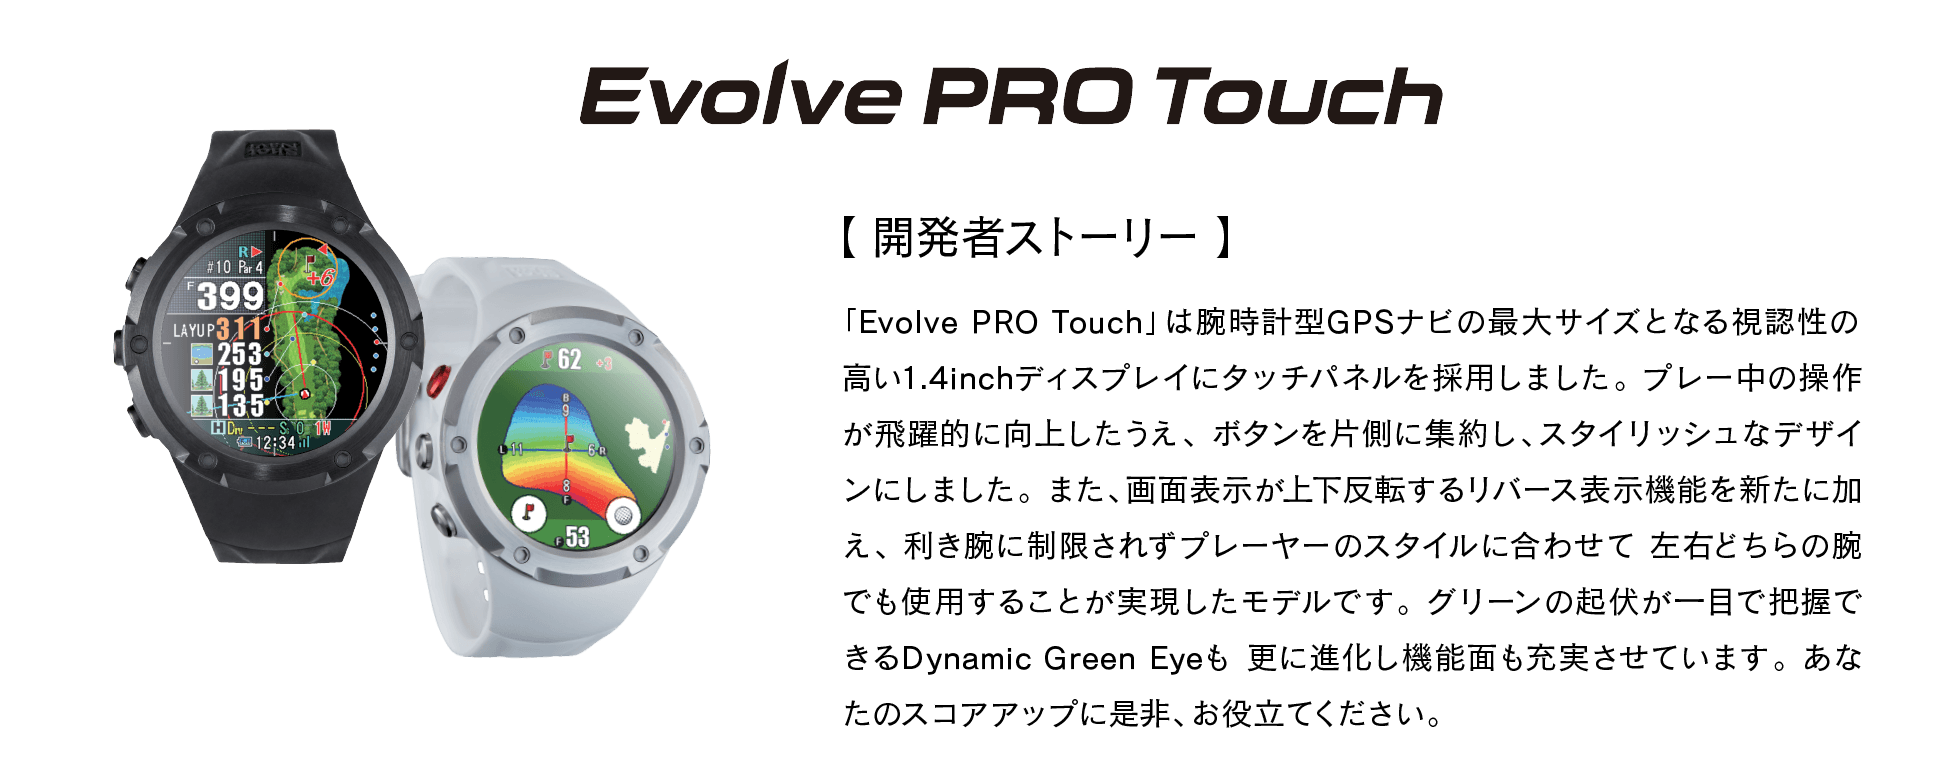 Evolve Pro Touch